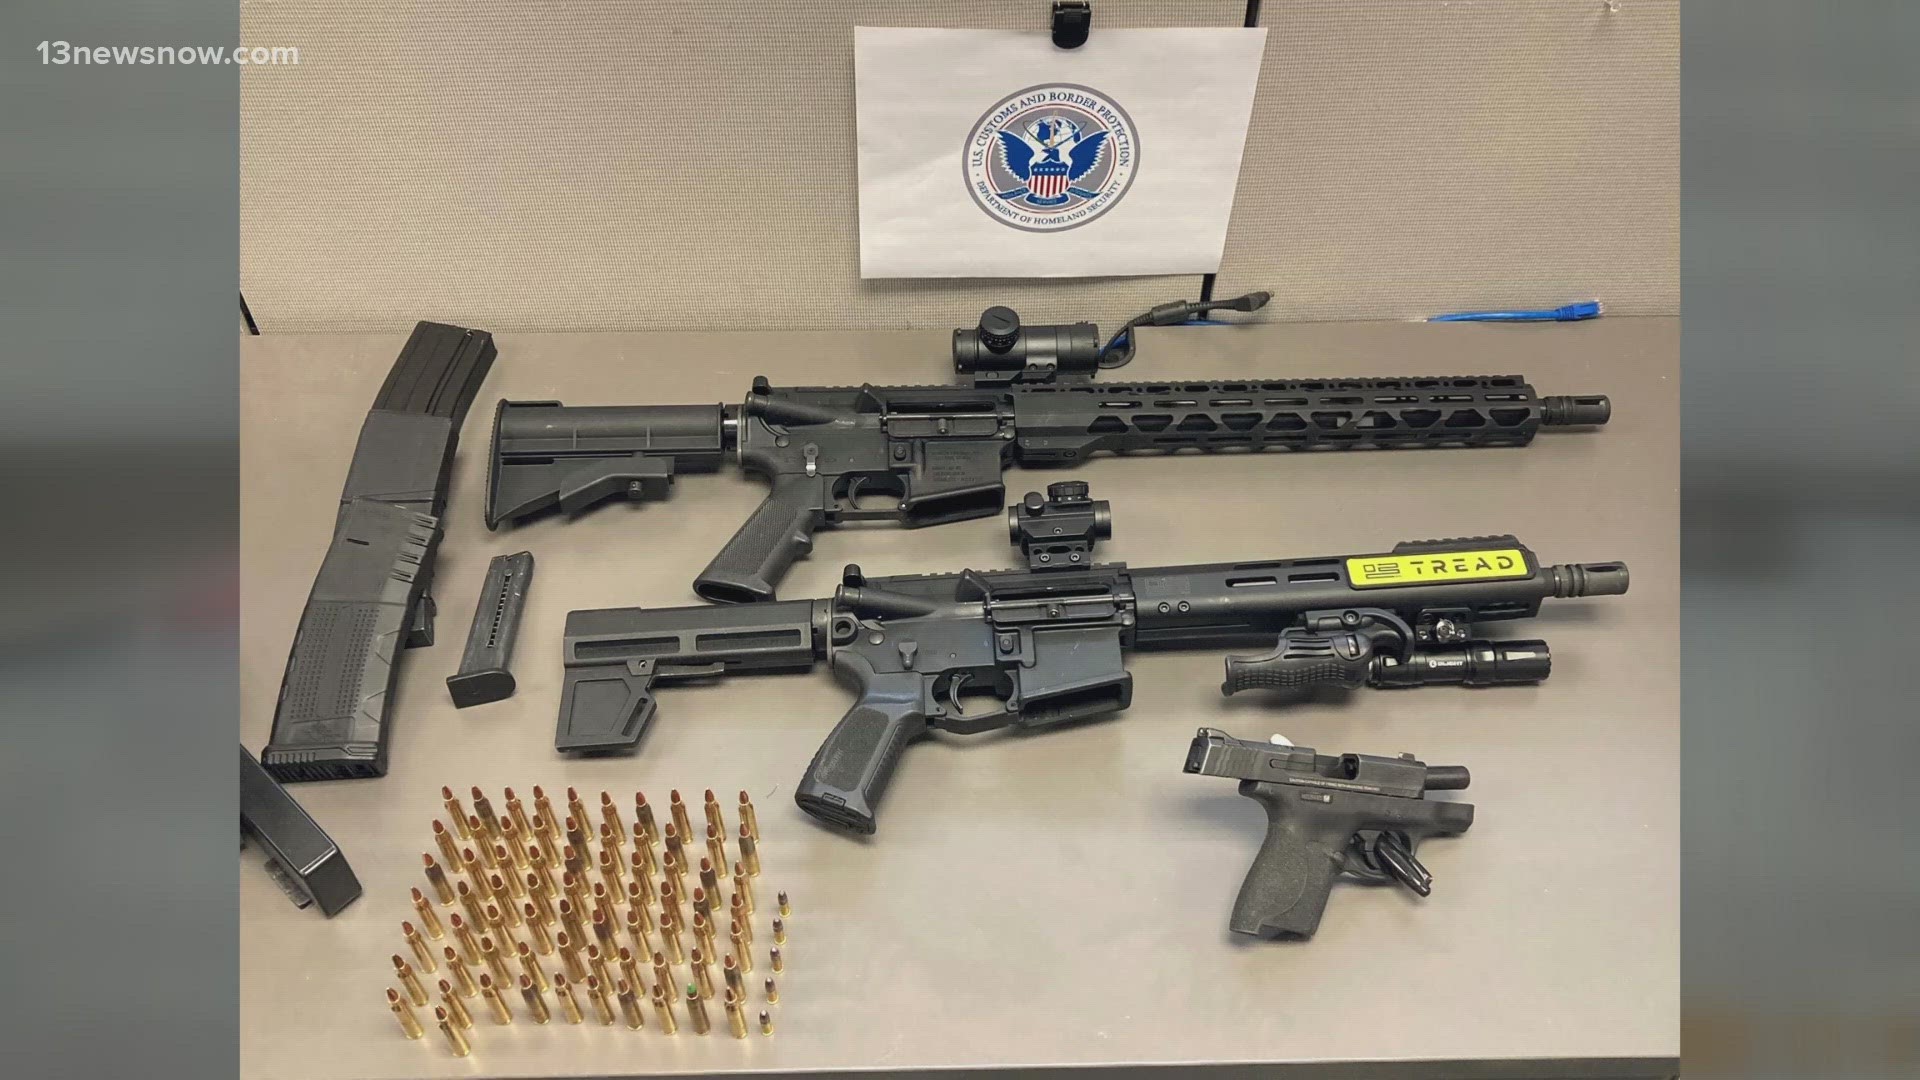 Three guns and over 200 rounds of ammunition were seized by US Customs and Border Protection in Norfolk earlier this month.